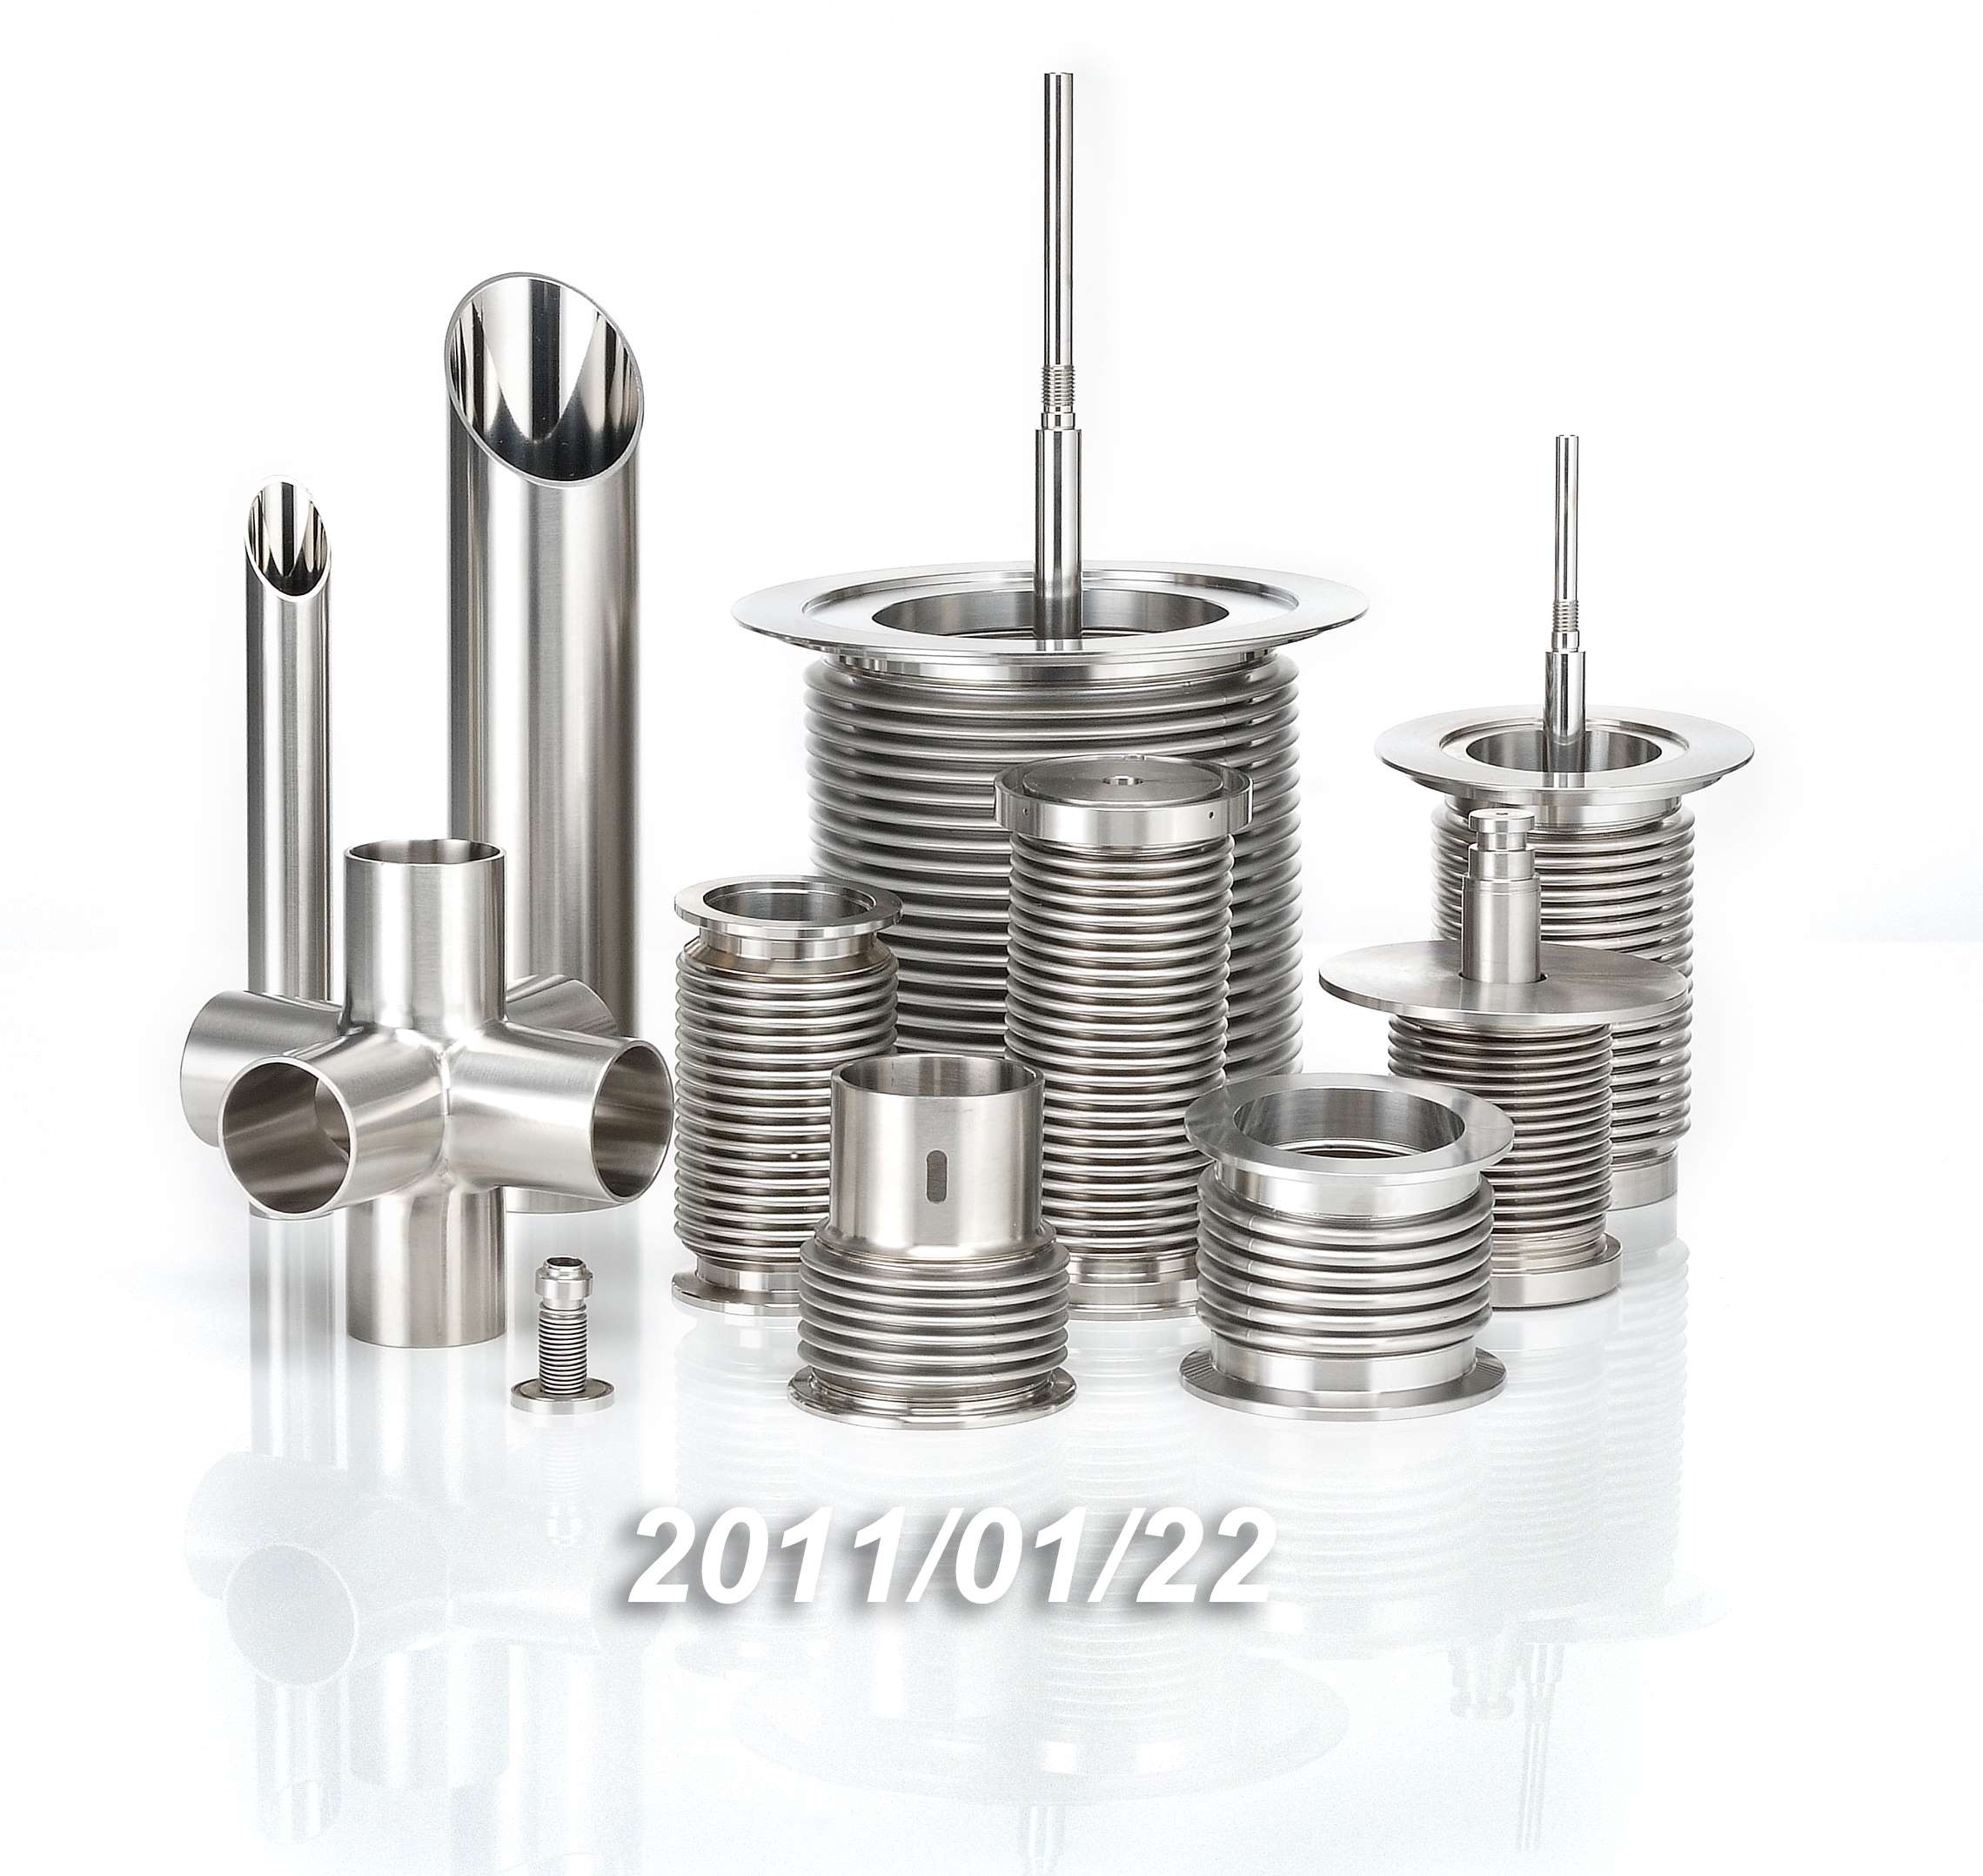 Qualified Fittings Manufacturer and Supplier